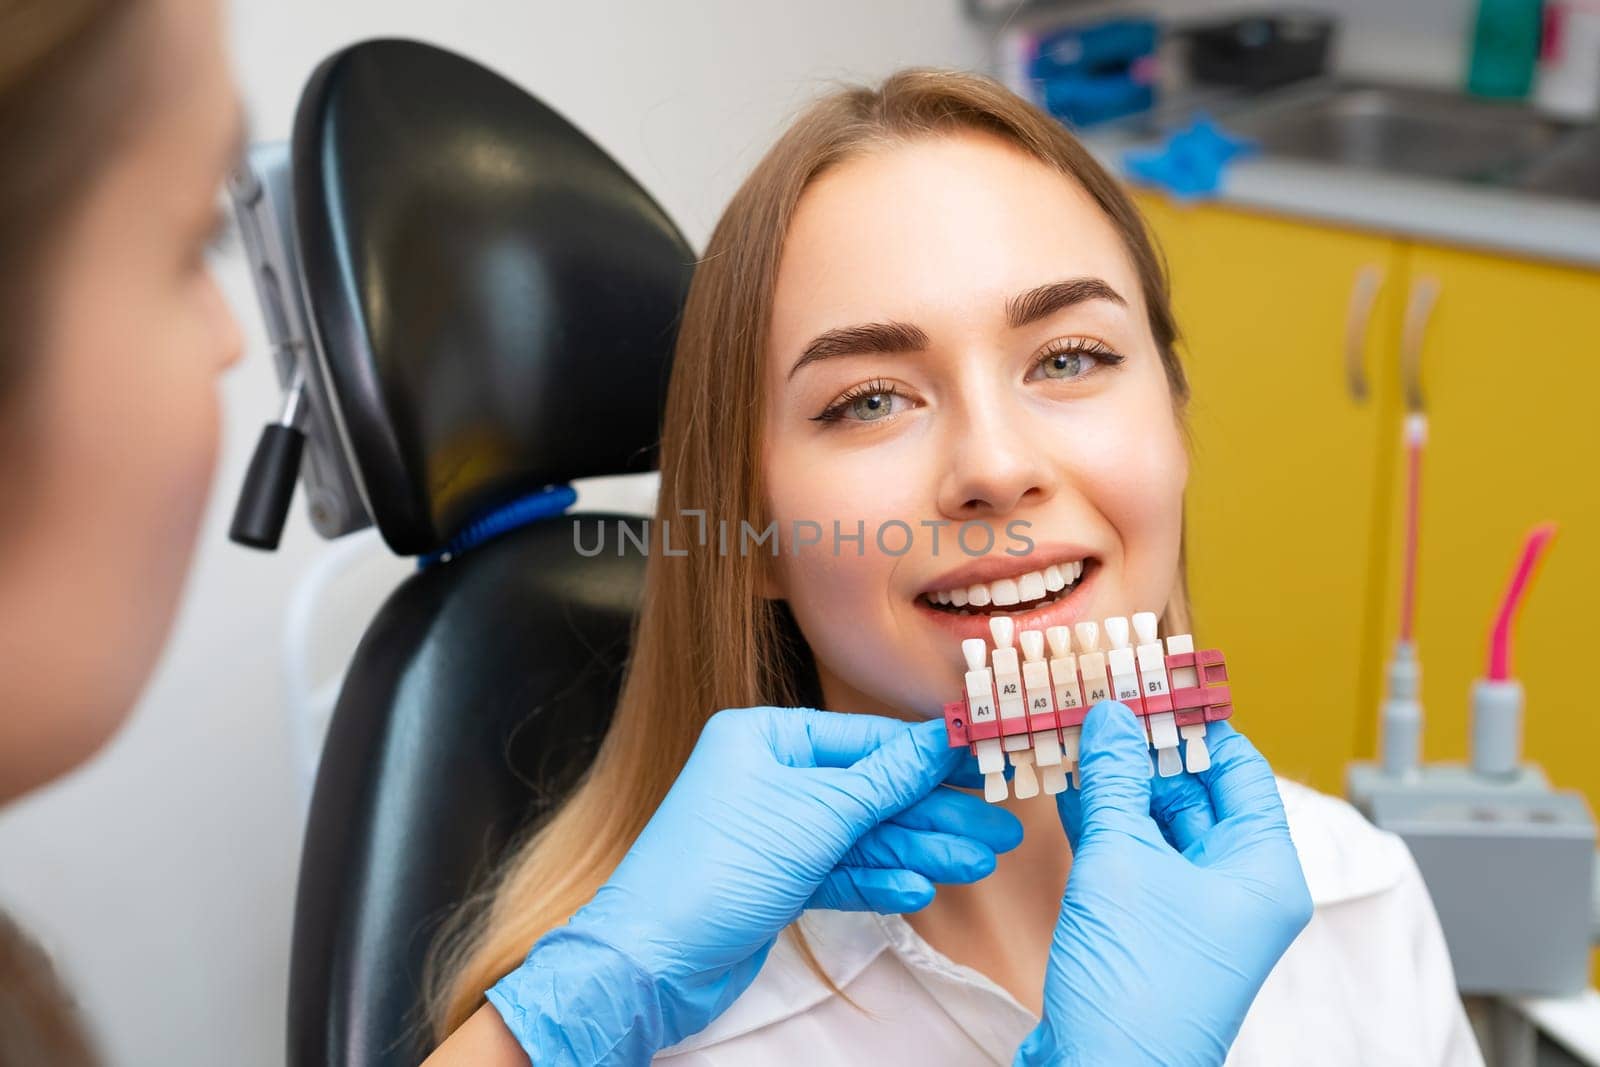 Dentist uses a set of implants with various shades of tone for whitening of teeth to young woman. by vladimka